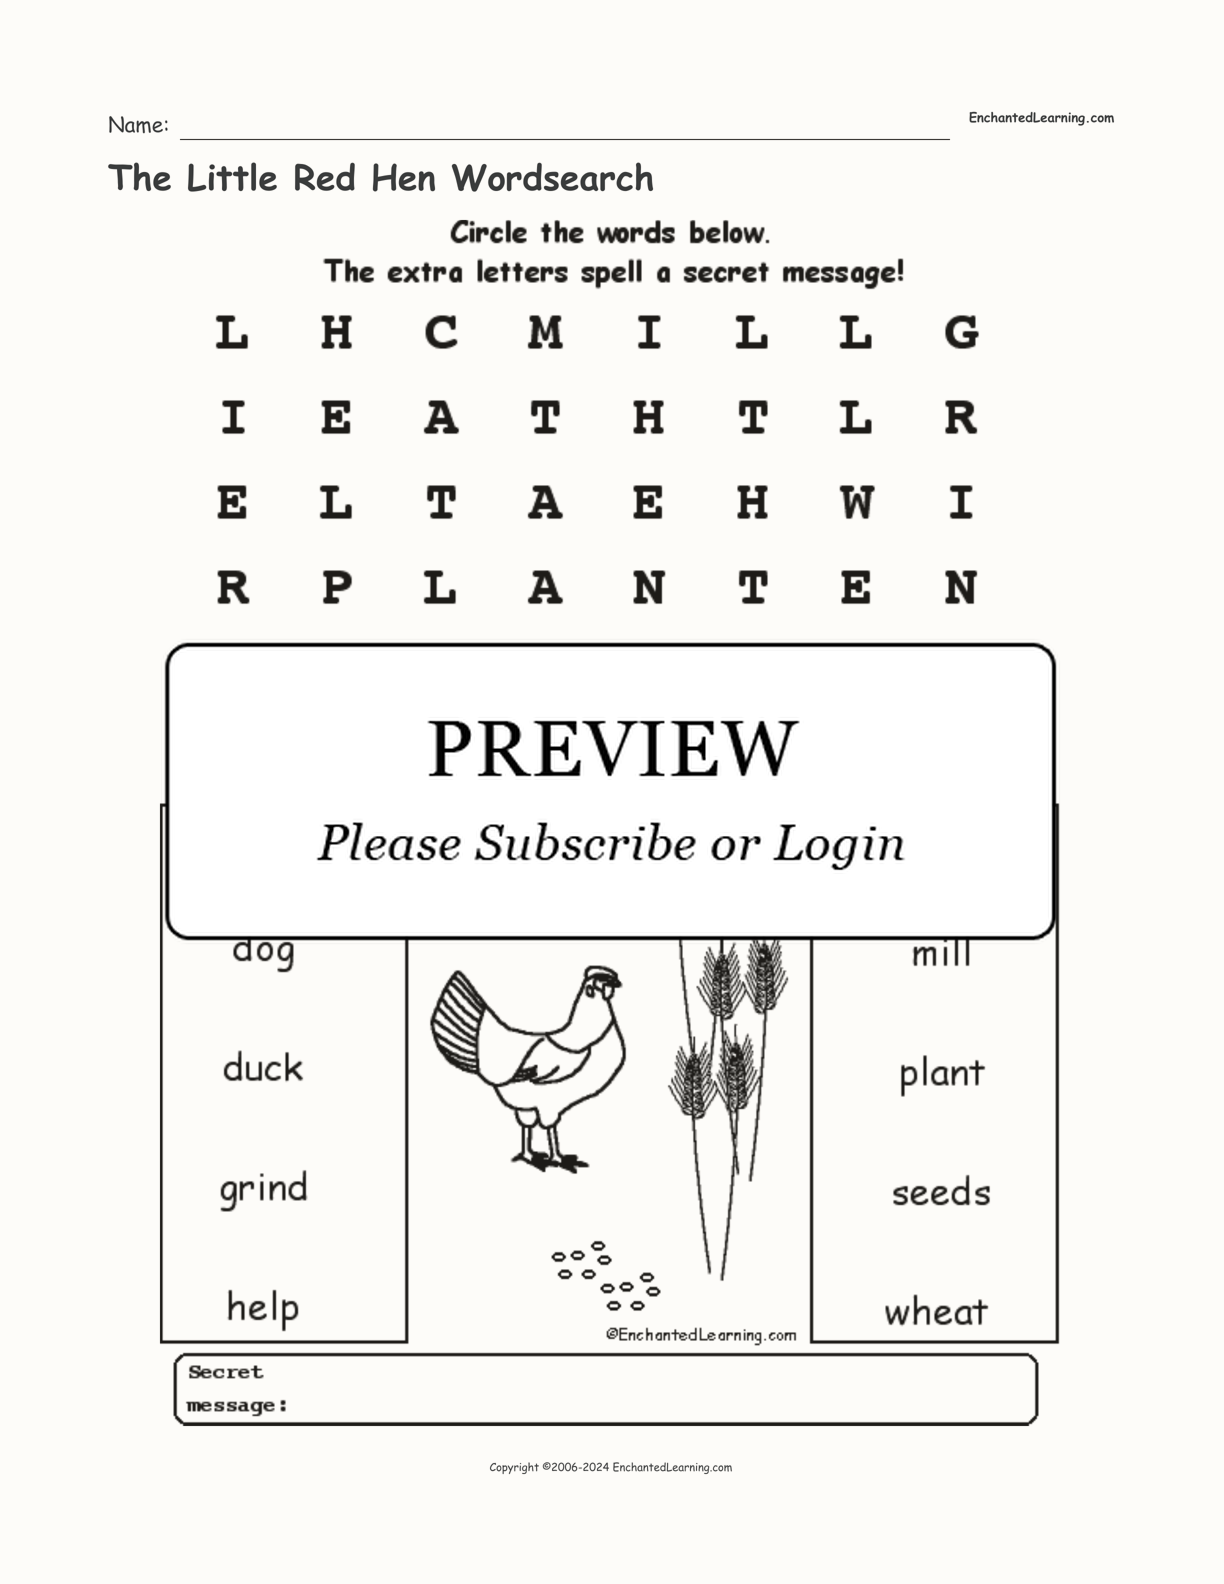 The Little Red Hen Wordsearch interactive worksheet page 1